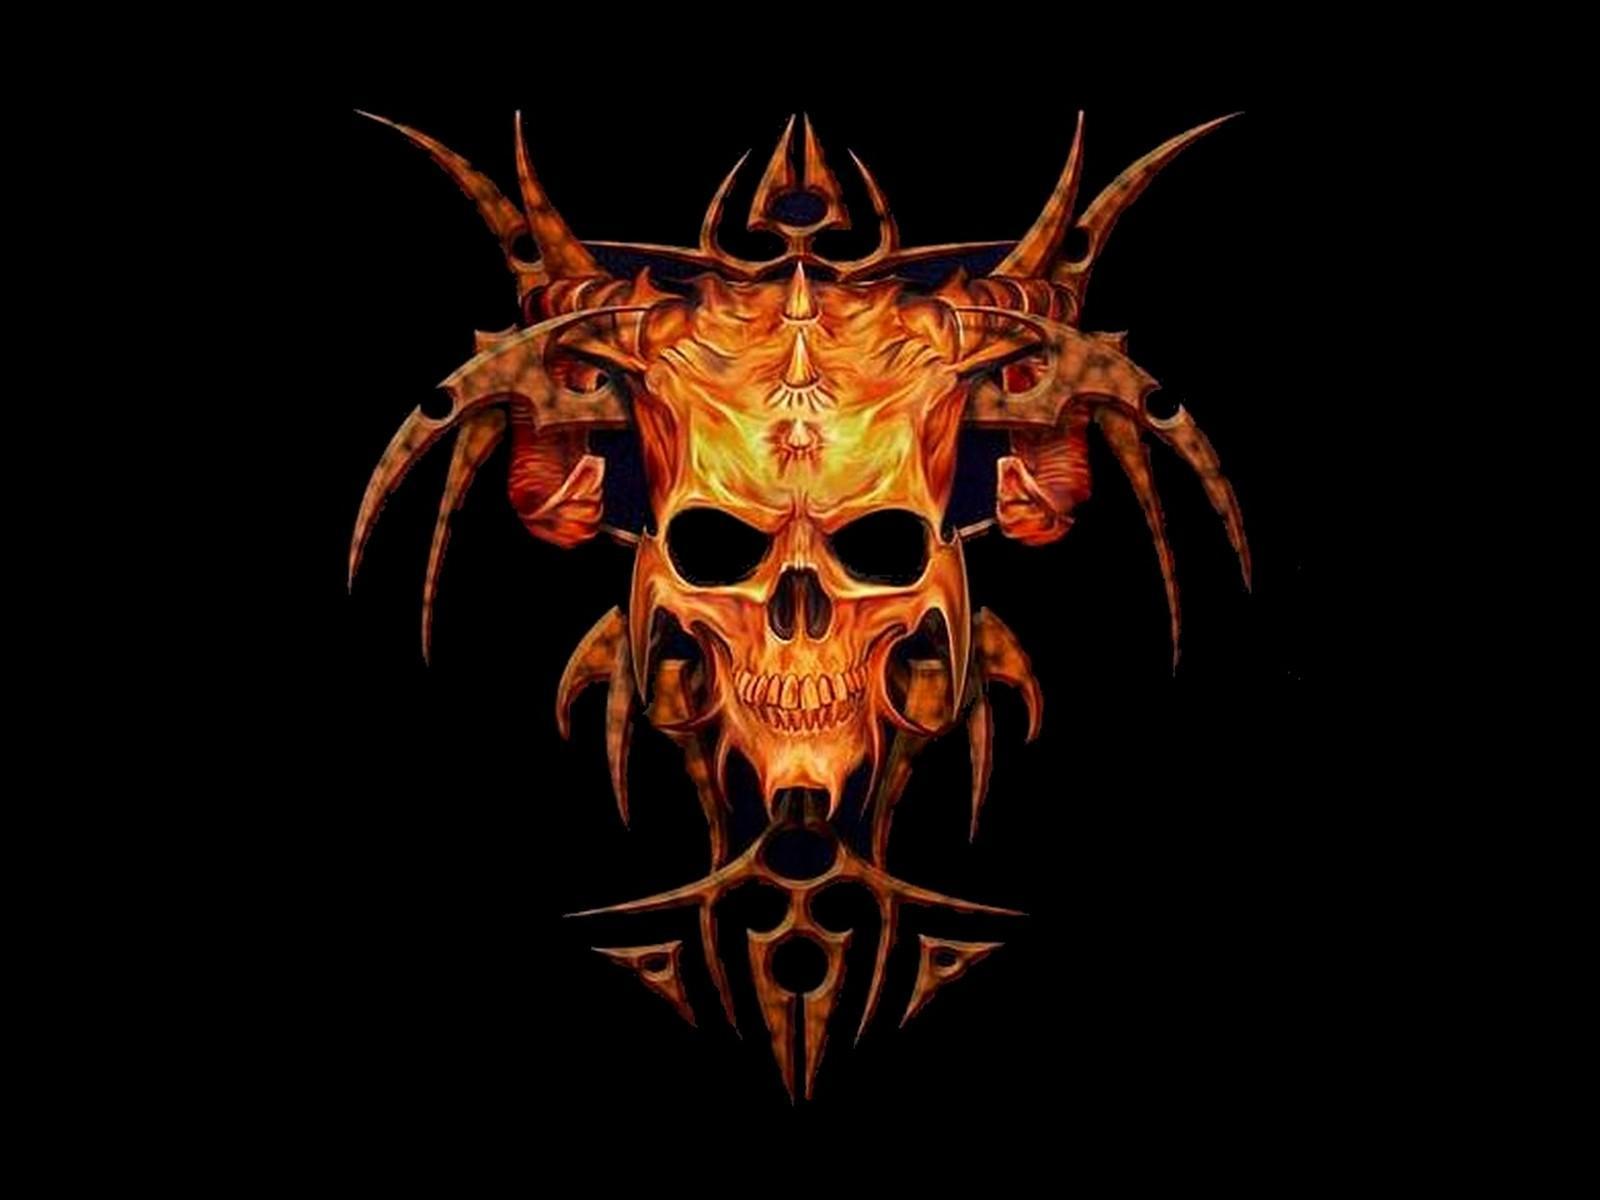 Skull Free Wallpaper with Resolution 1600x1200PX Wallpaper Free